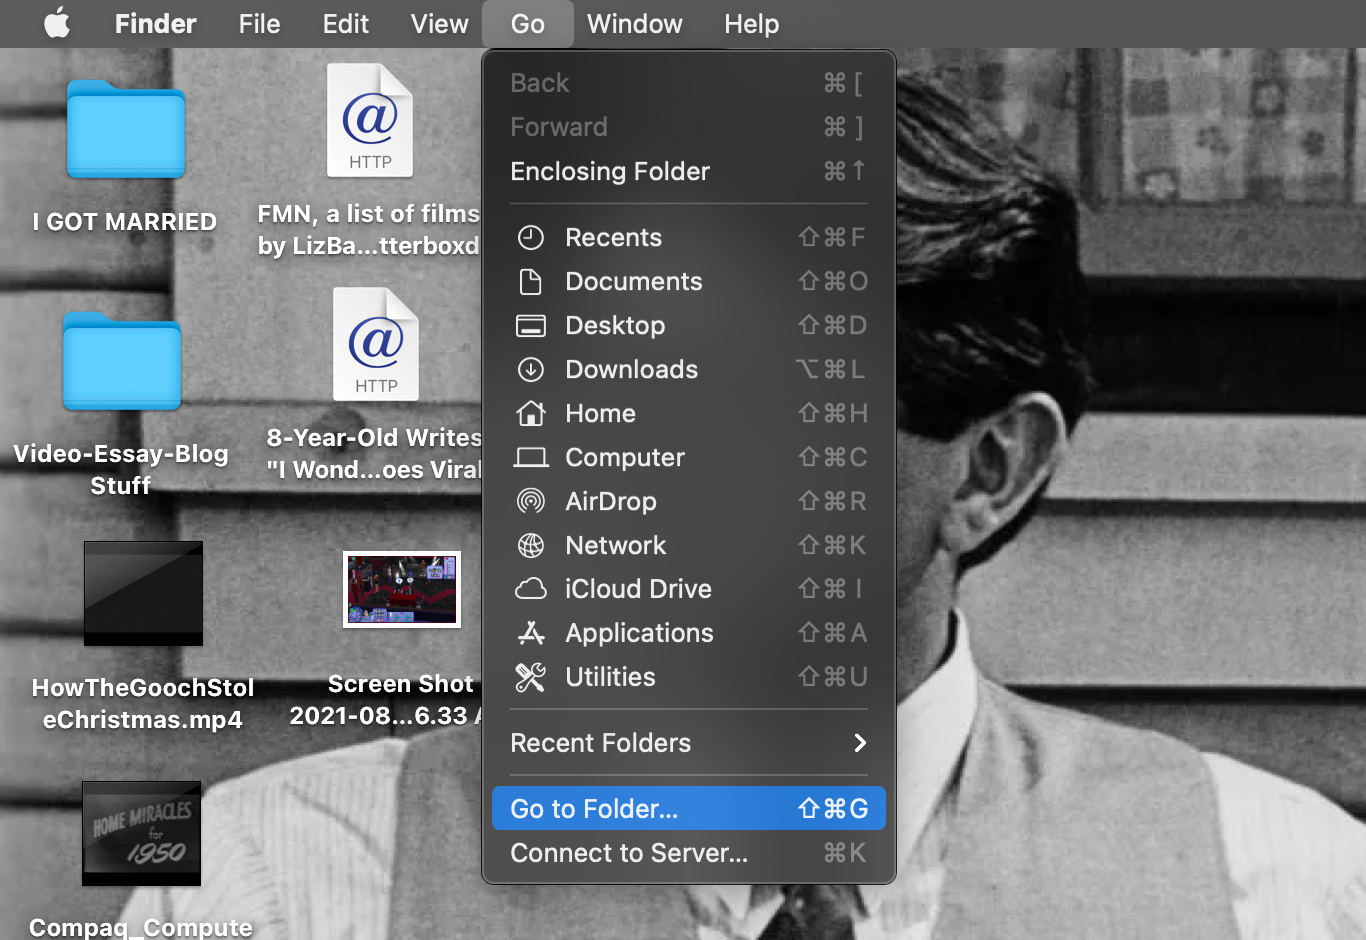 Finder's Go menu is open, with the Go to Folder option selected